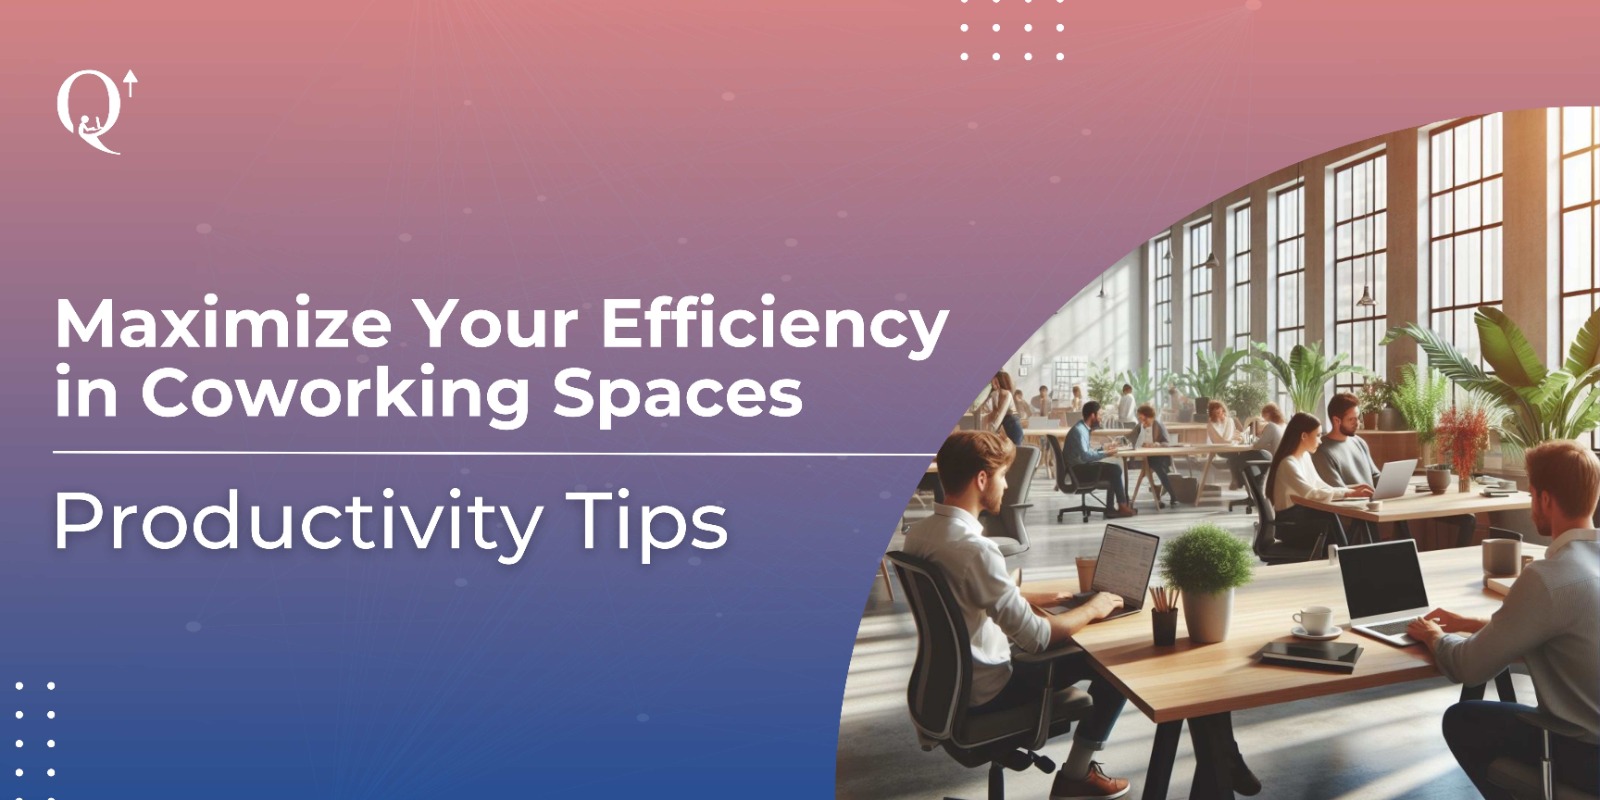 How To Boost Productivity in Coworking Spaces